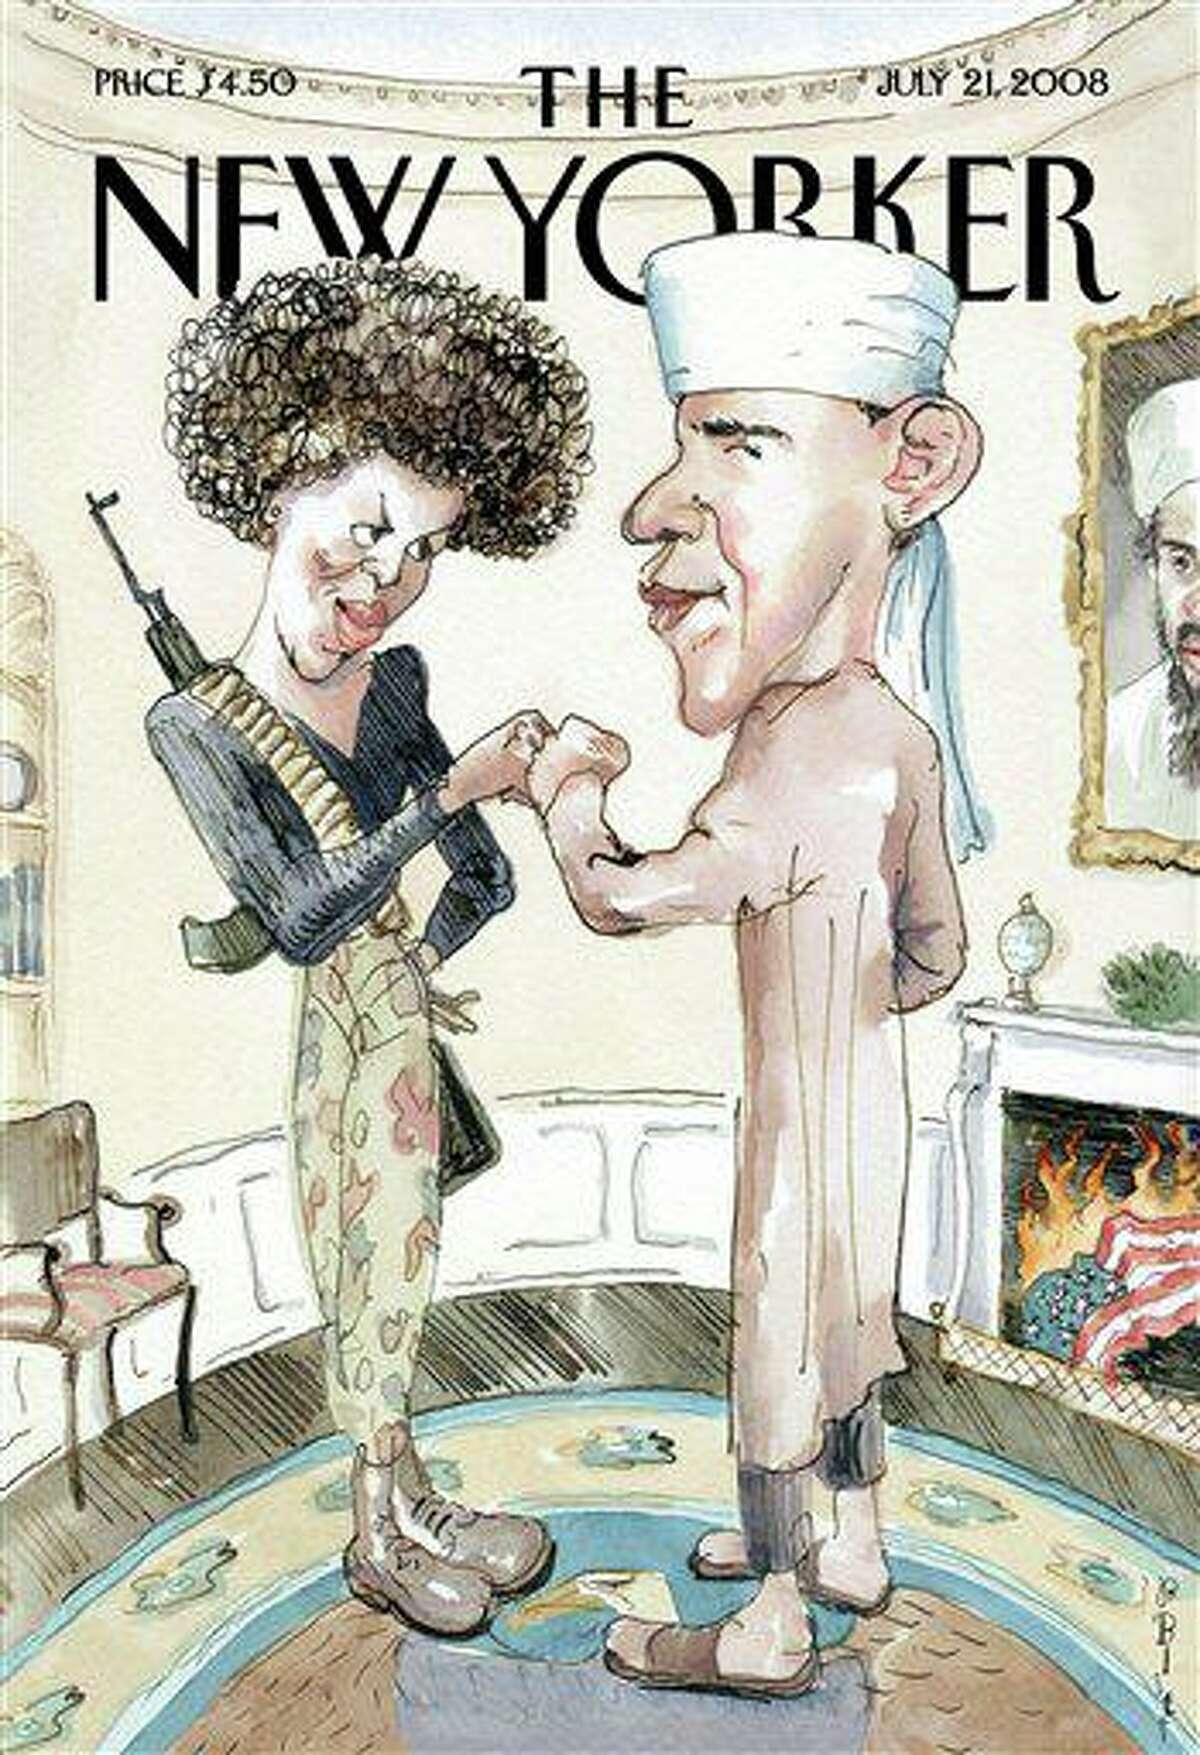 This illustration provided by The New Yorker magazine, the cover of the July 21, 2008 issue by artist Barry Blitt, shows Democratic presidential candidate Barack Obama dressed as a Muslim and his wife as a terrorist. The magazine says the cover is meant to satirize the use of scare tactics and misinformation in the presidential election to derail Obama’s campaign, but Obama's campaign called it "tasteless and offensive." (AP Photo/New Yorker)